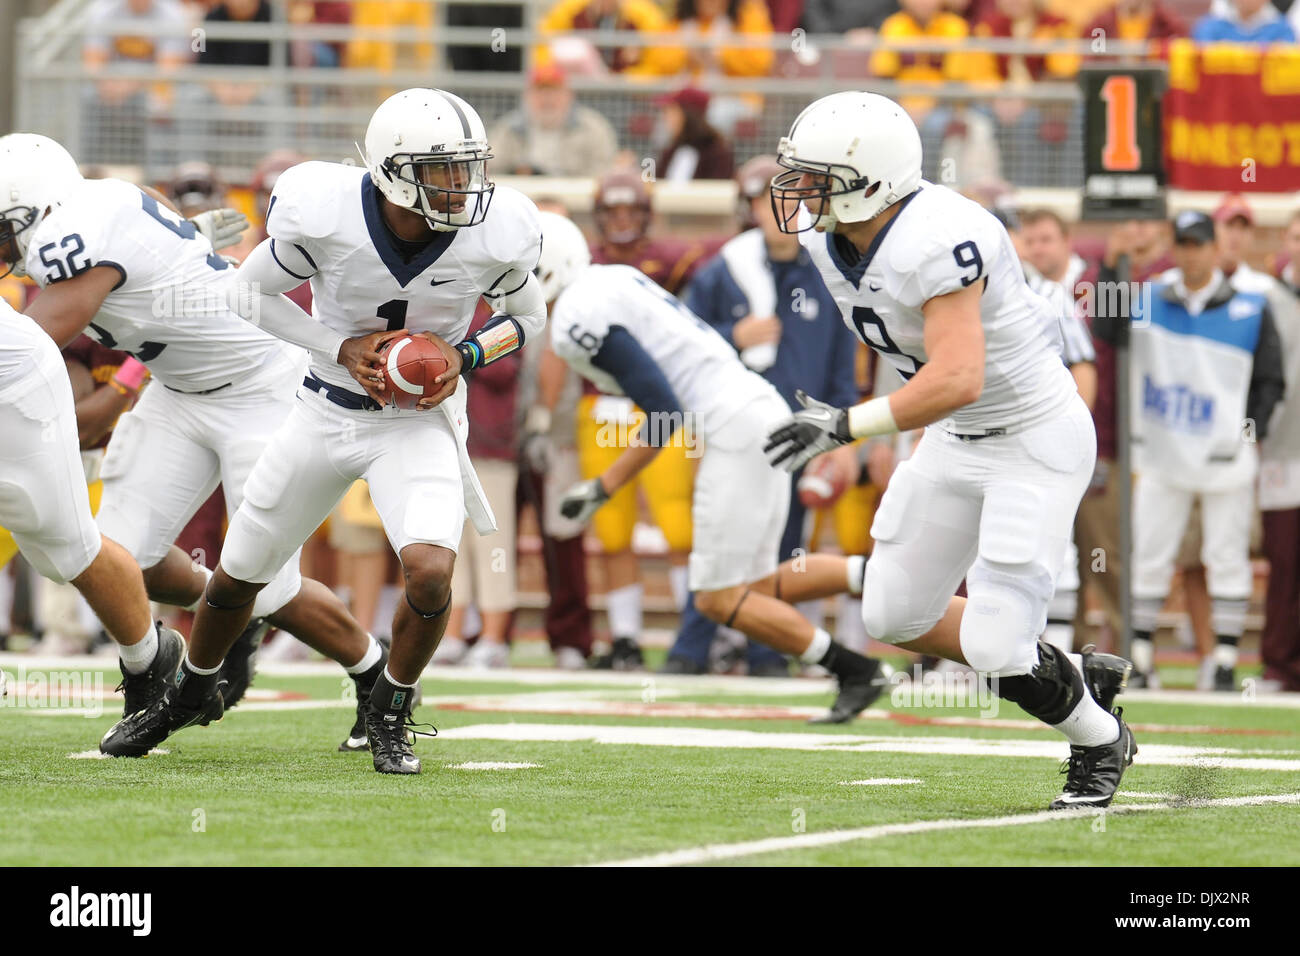 Oct. 22, 2010 - Minneapolis, Minnesota, United States of America - Penn State University quarterback Rob Bolden (#1) in action during the game between the Minnesota Gophers and the Penn State Nittany Lions at the TCF Stadium in Minneapolis, Minnesota.  Penn State defeats  Minnesota 33-21. (Credit Image: © Marilyn Indahl/Southcreek Global/ZUMApress.com) Stock Photo